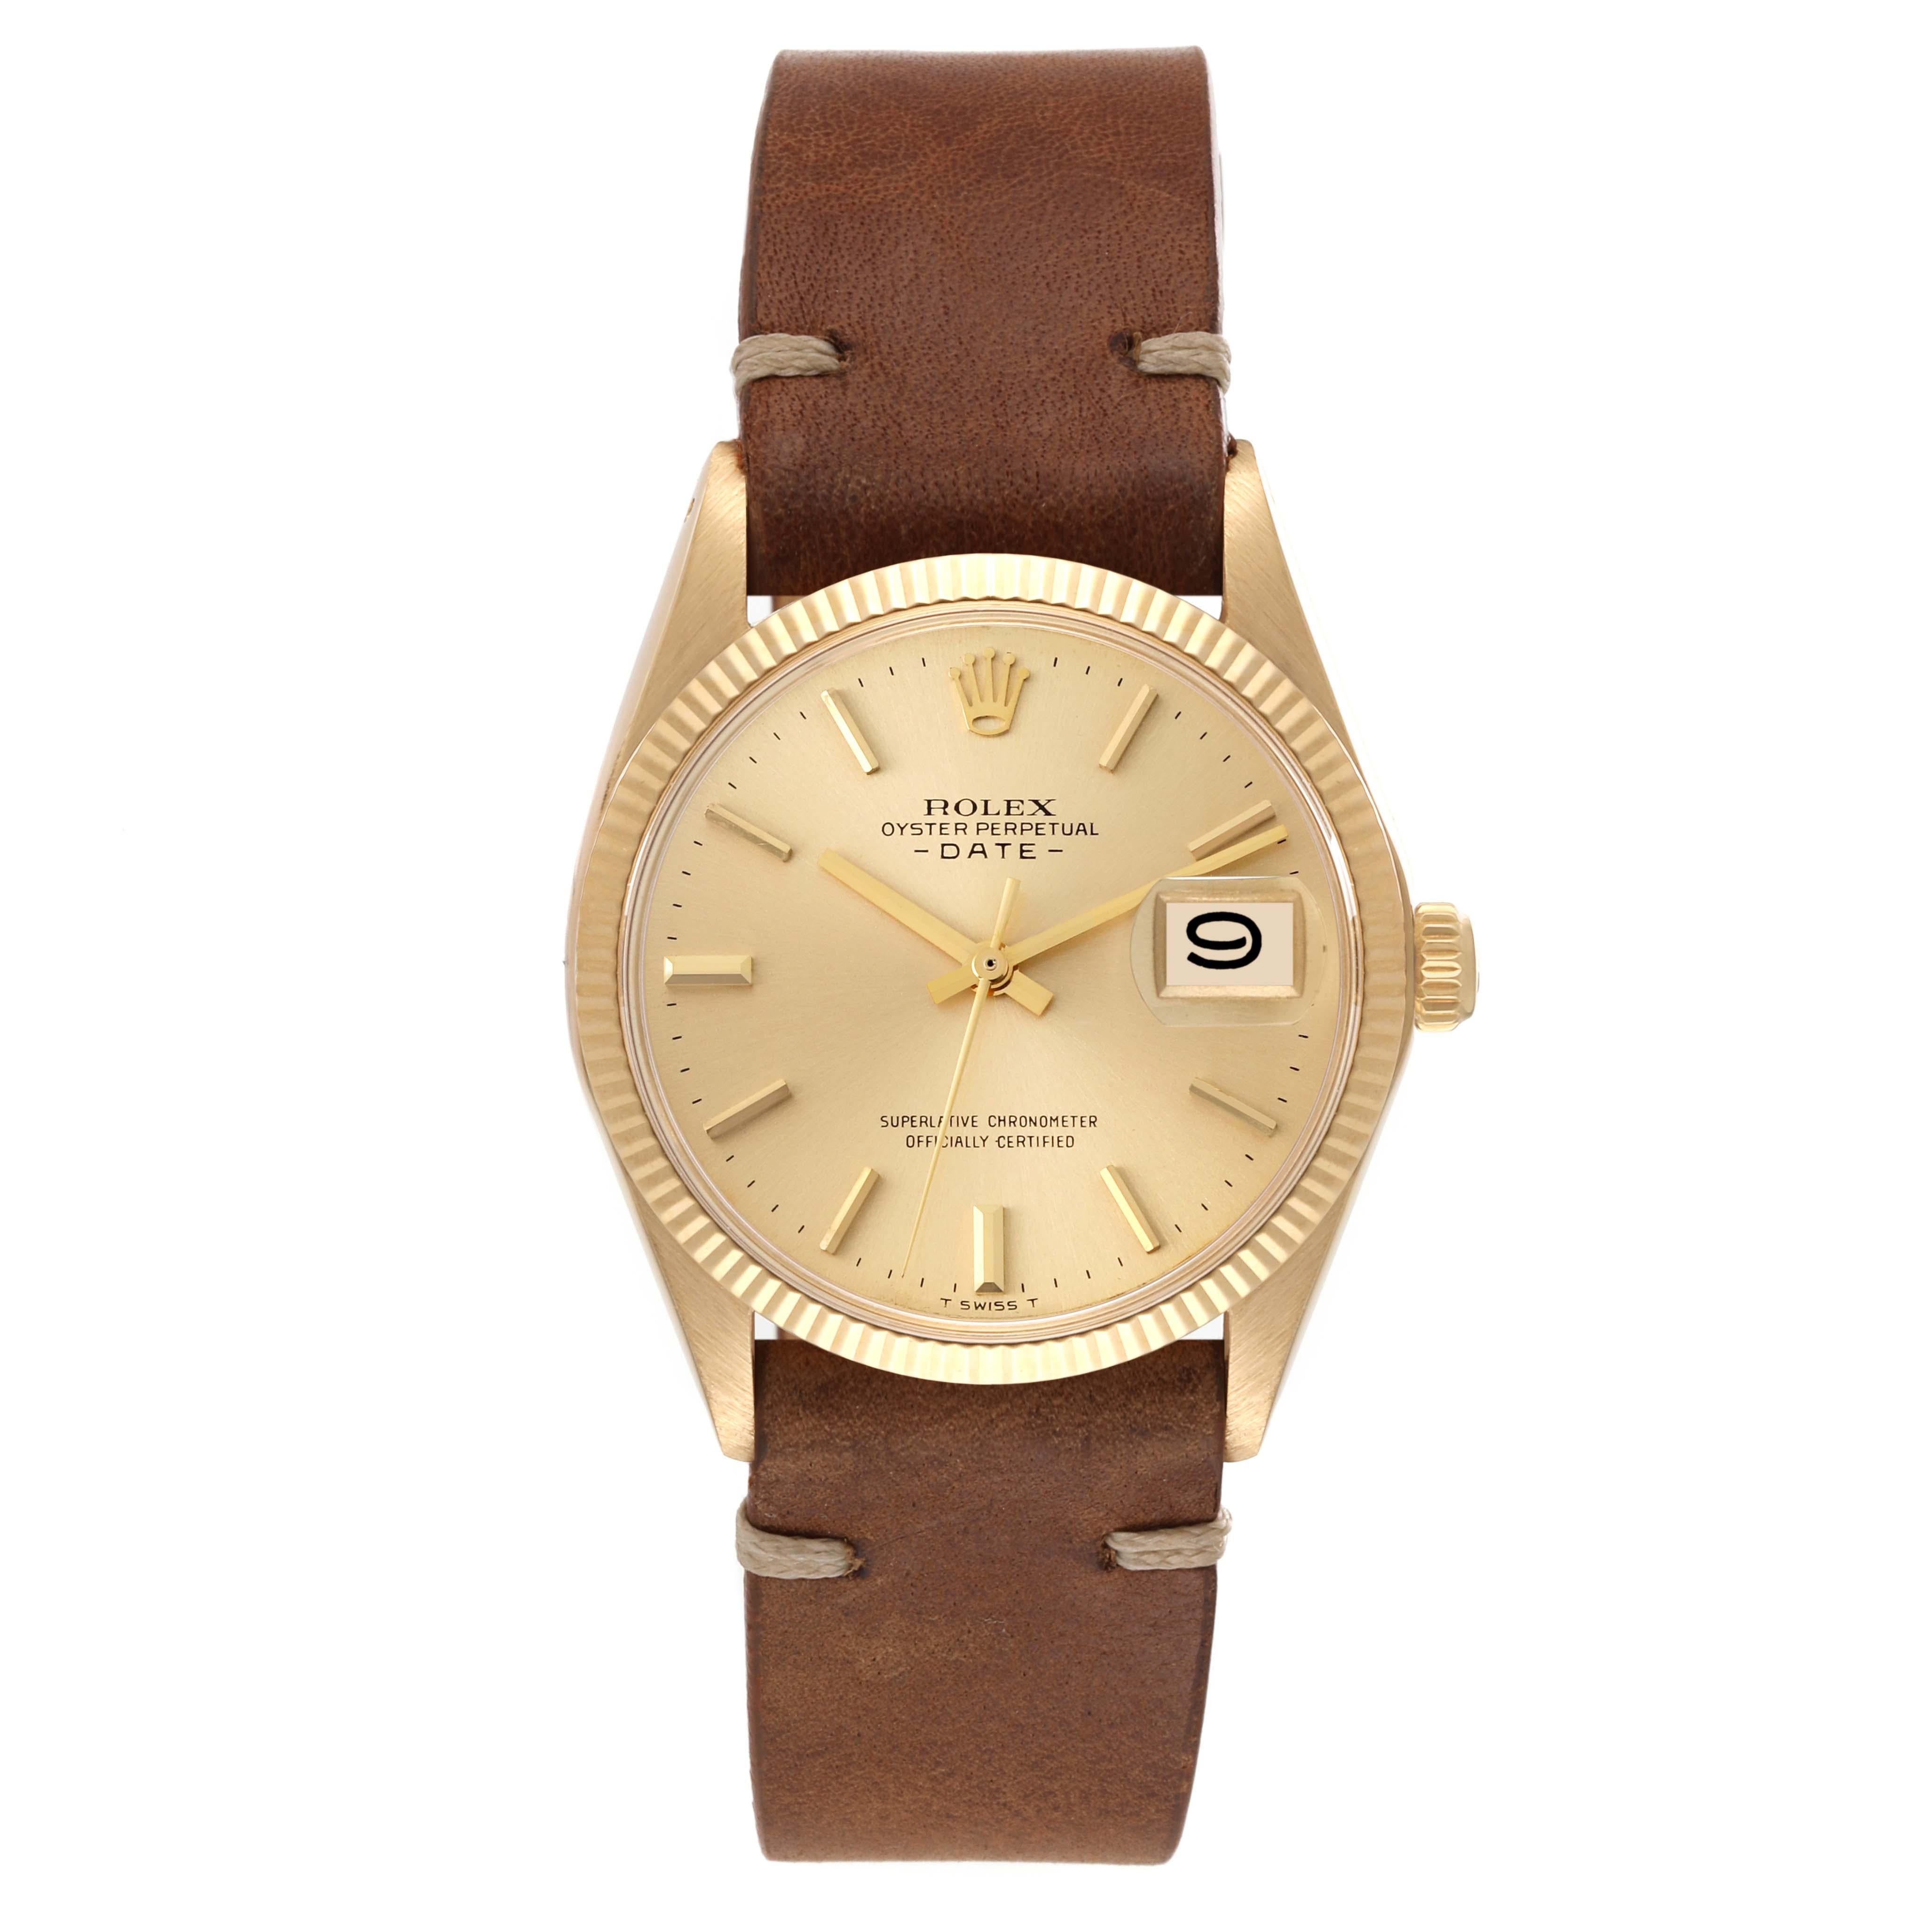 Rolex Date Yellow Gold Leather Strap Automatic Vintage Mens Watch 1503. Officially certified chronometer automatic self-winding movement. 18k yellow gold case 34.0 mm in diameter. Rolex logo on a crown. 14k yellow gold fluted bezel. Acrylic crystal